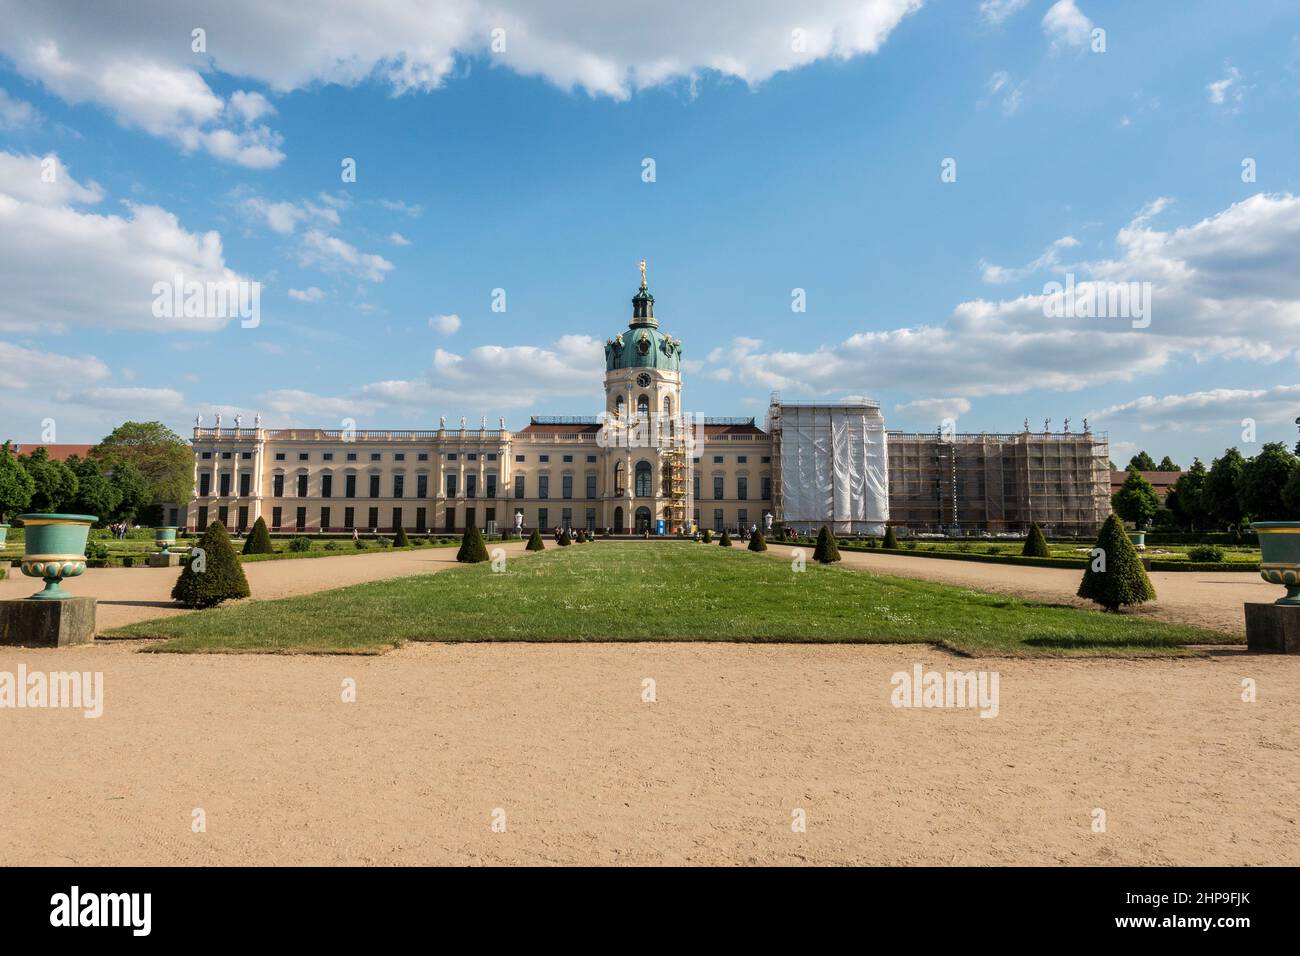 Schloss Charlottenburg (Charlottenburg Palace) in Berlin's district of the Charlottenburg-Wilmersdorf borough, On may 21, 2017. (Photo by Omer Messing Stock Photo